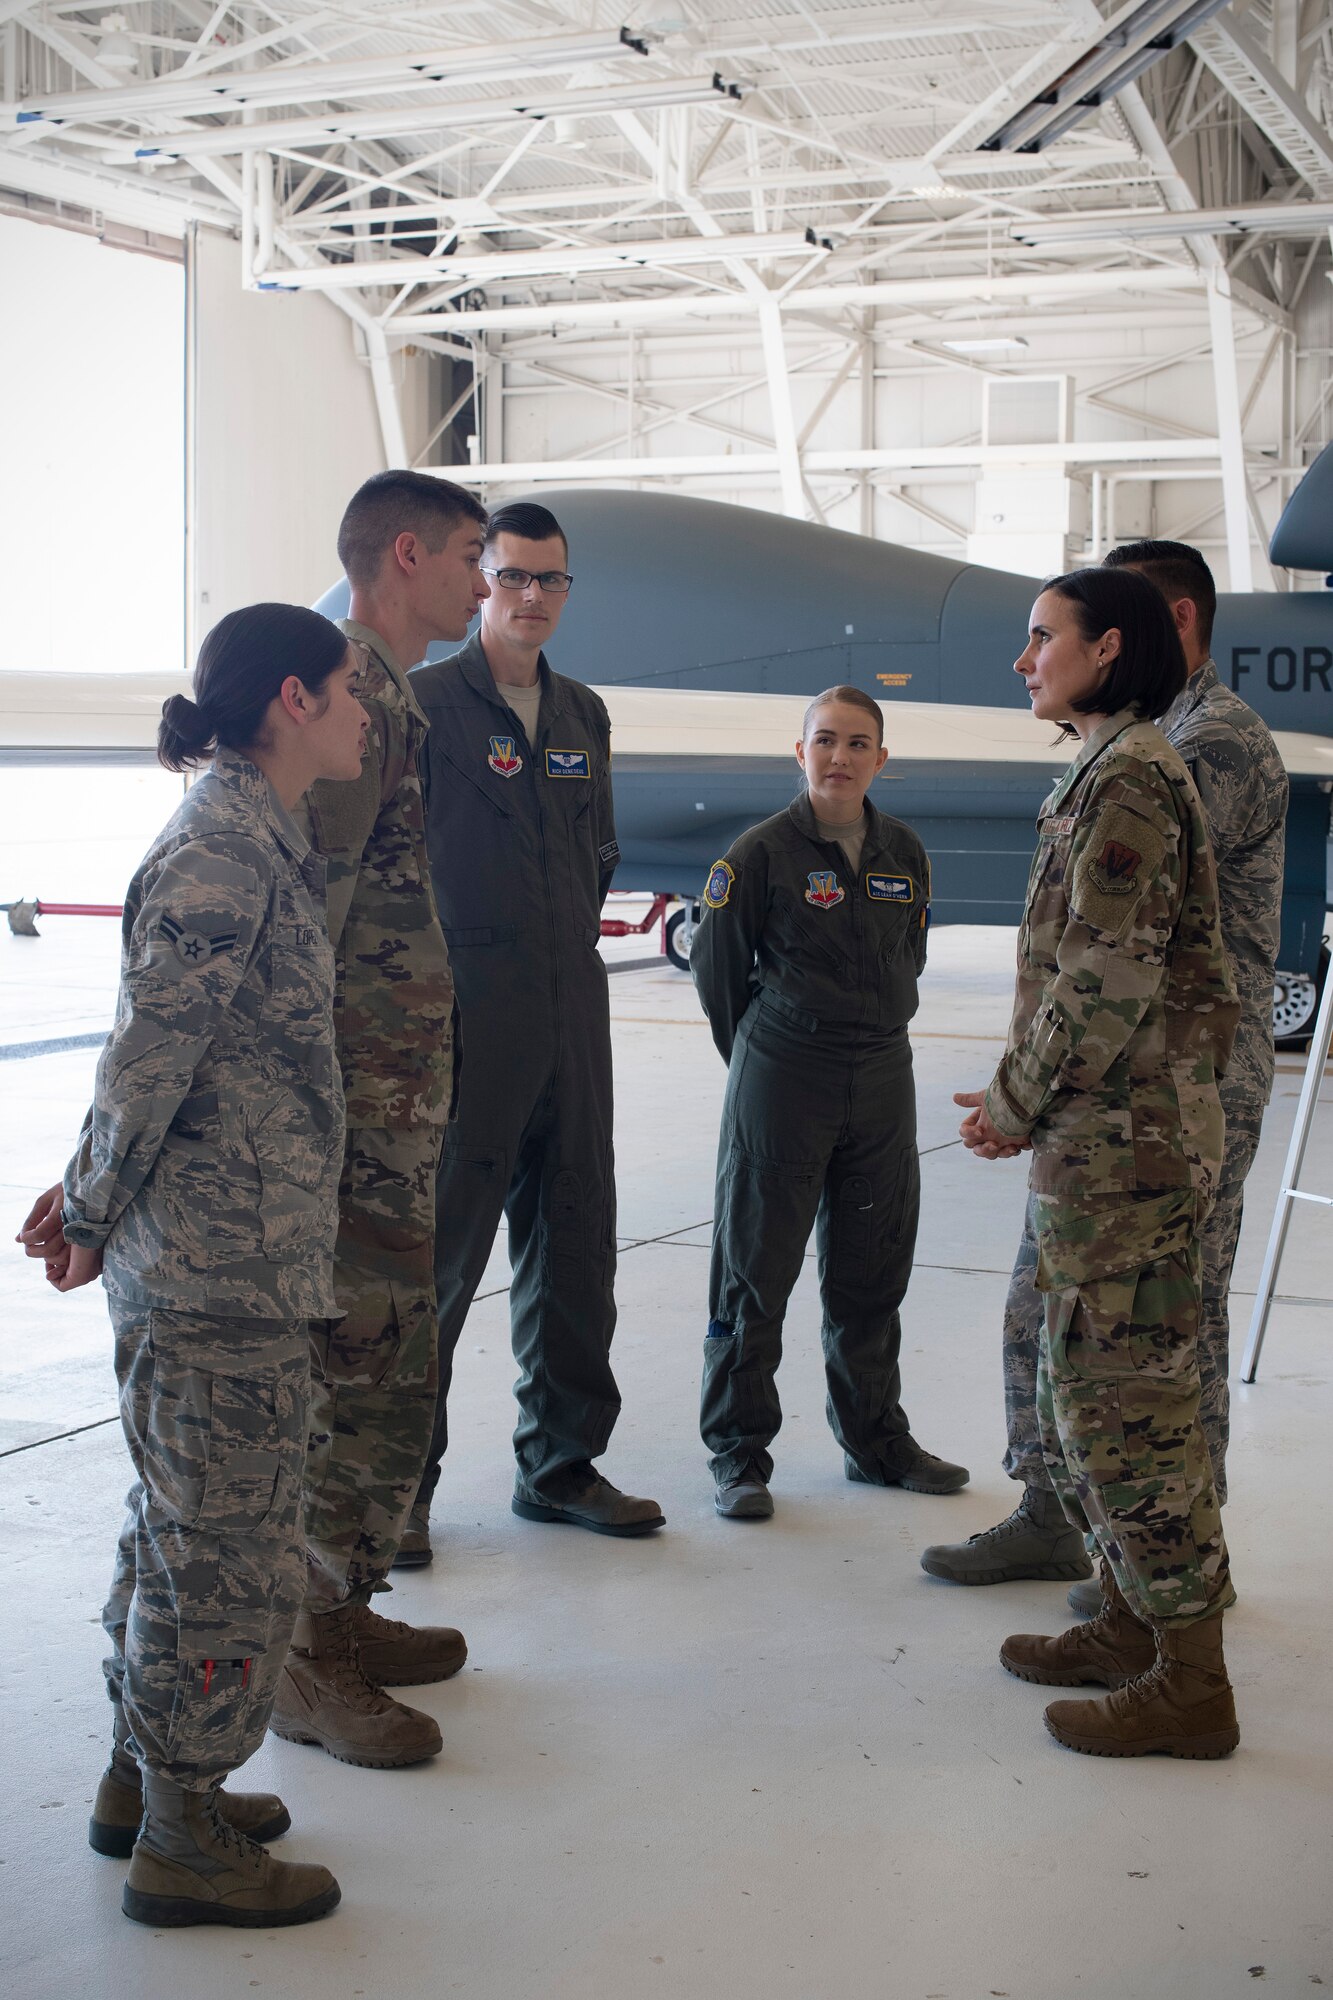 Chief Master Sgt. Summer Leifer, 25th Air Force command chief, right, talks to members of the 69th Reconnaissance Group and 69th Maintenance Squadron following a brief they delivered to her June 5, 2019, on Grand Forks Air Force Base, North Dakota. The brief provided to Leifer was about the operations and capabilities of the RQ-4 Global Hawk, which is Grand Forks AFB’s primary mission. (U.S Air Force photo by Senior Airman Elora J. Martinez)